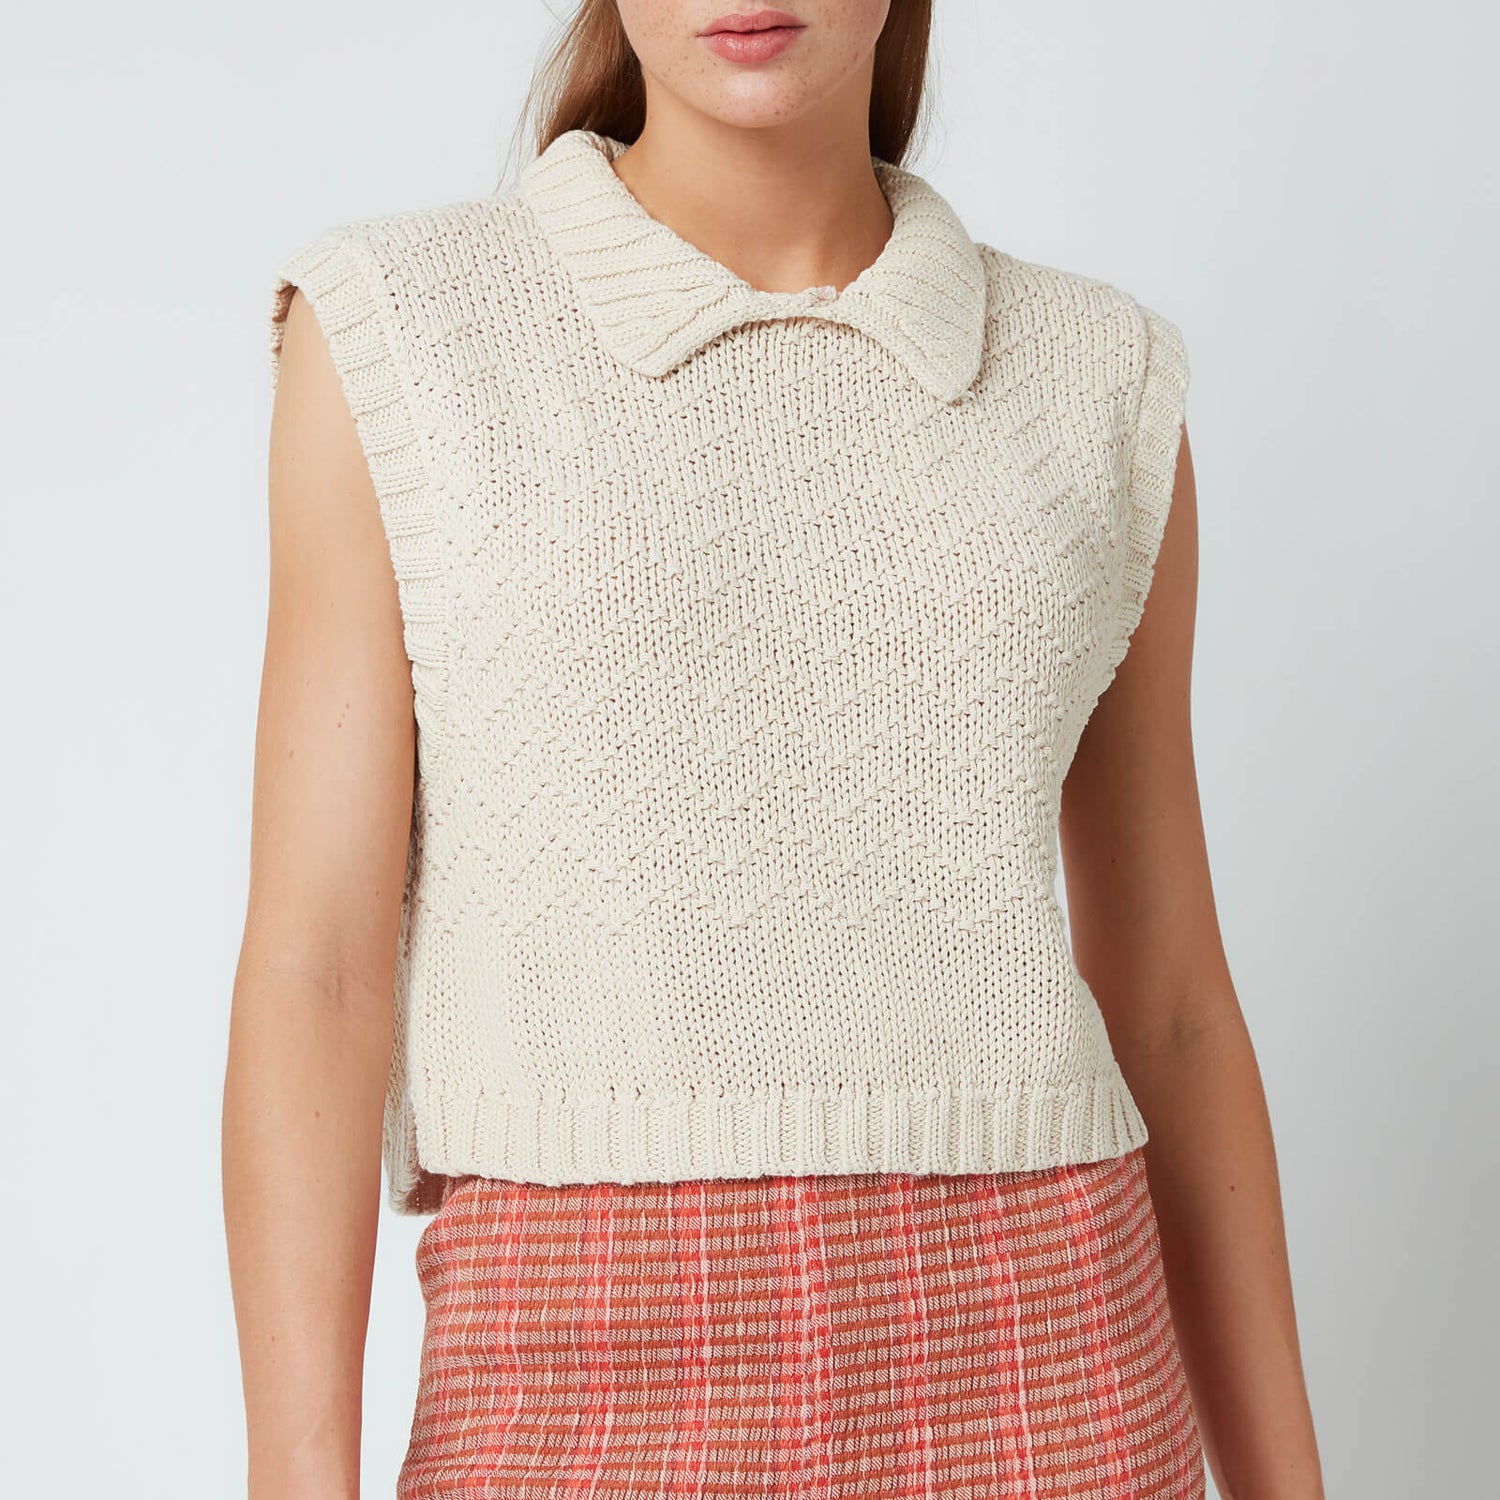 Free People Women's Winding Road Sweater Vest - Natural - M